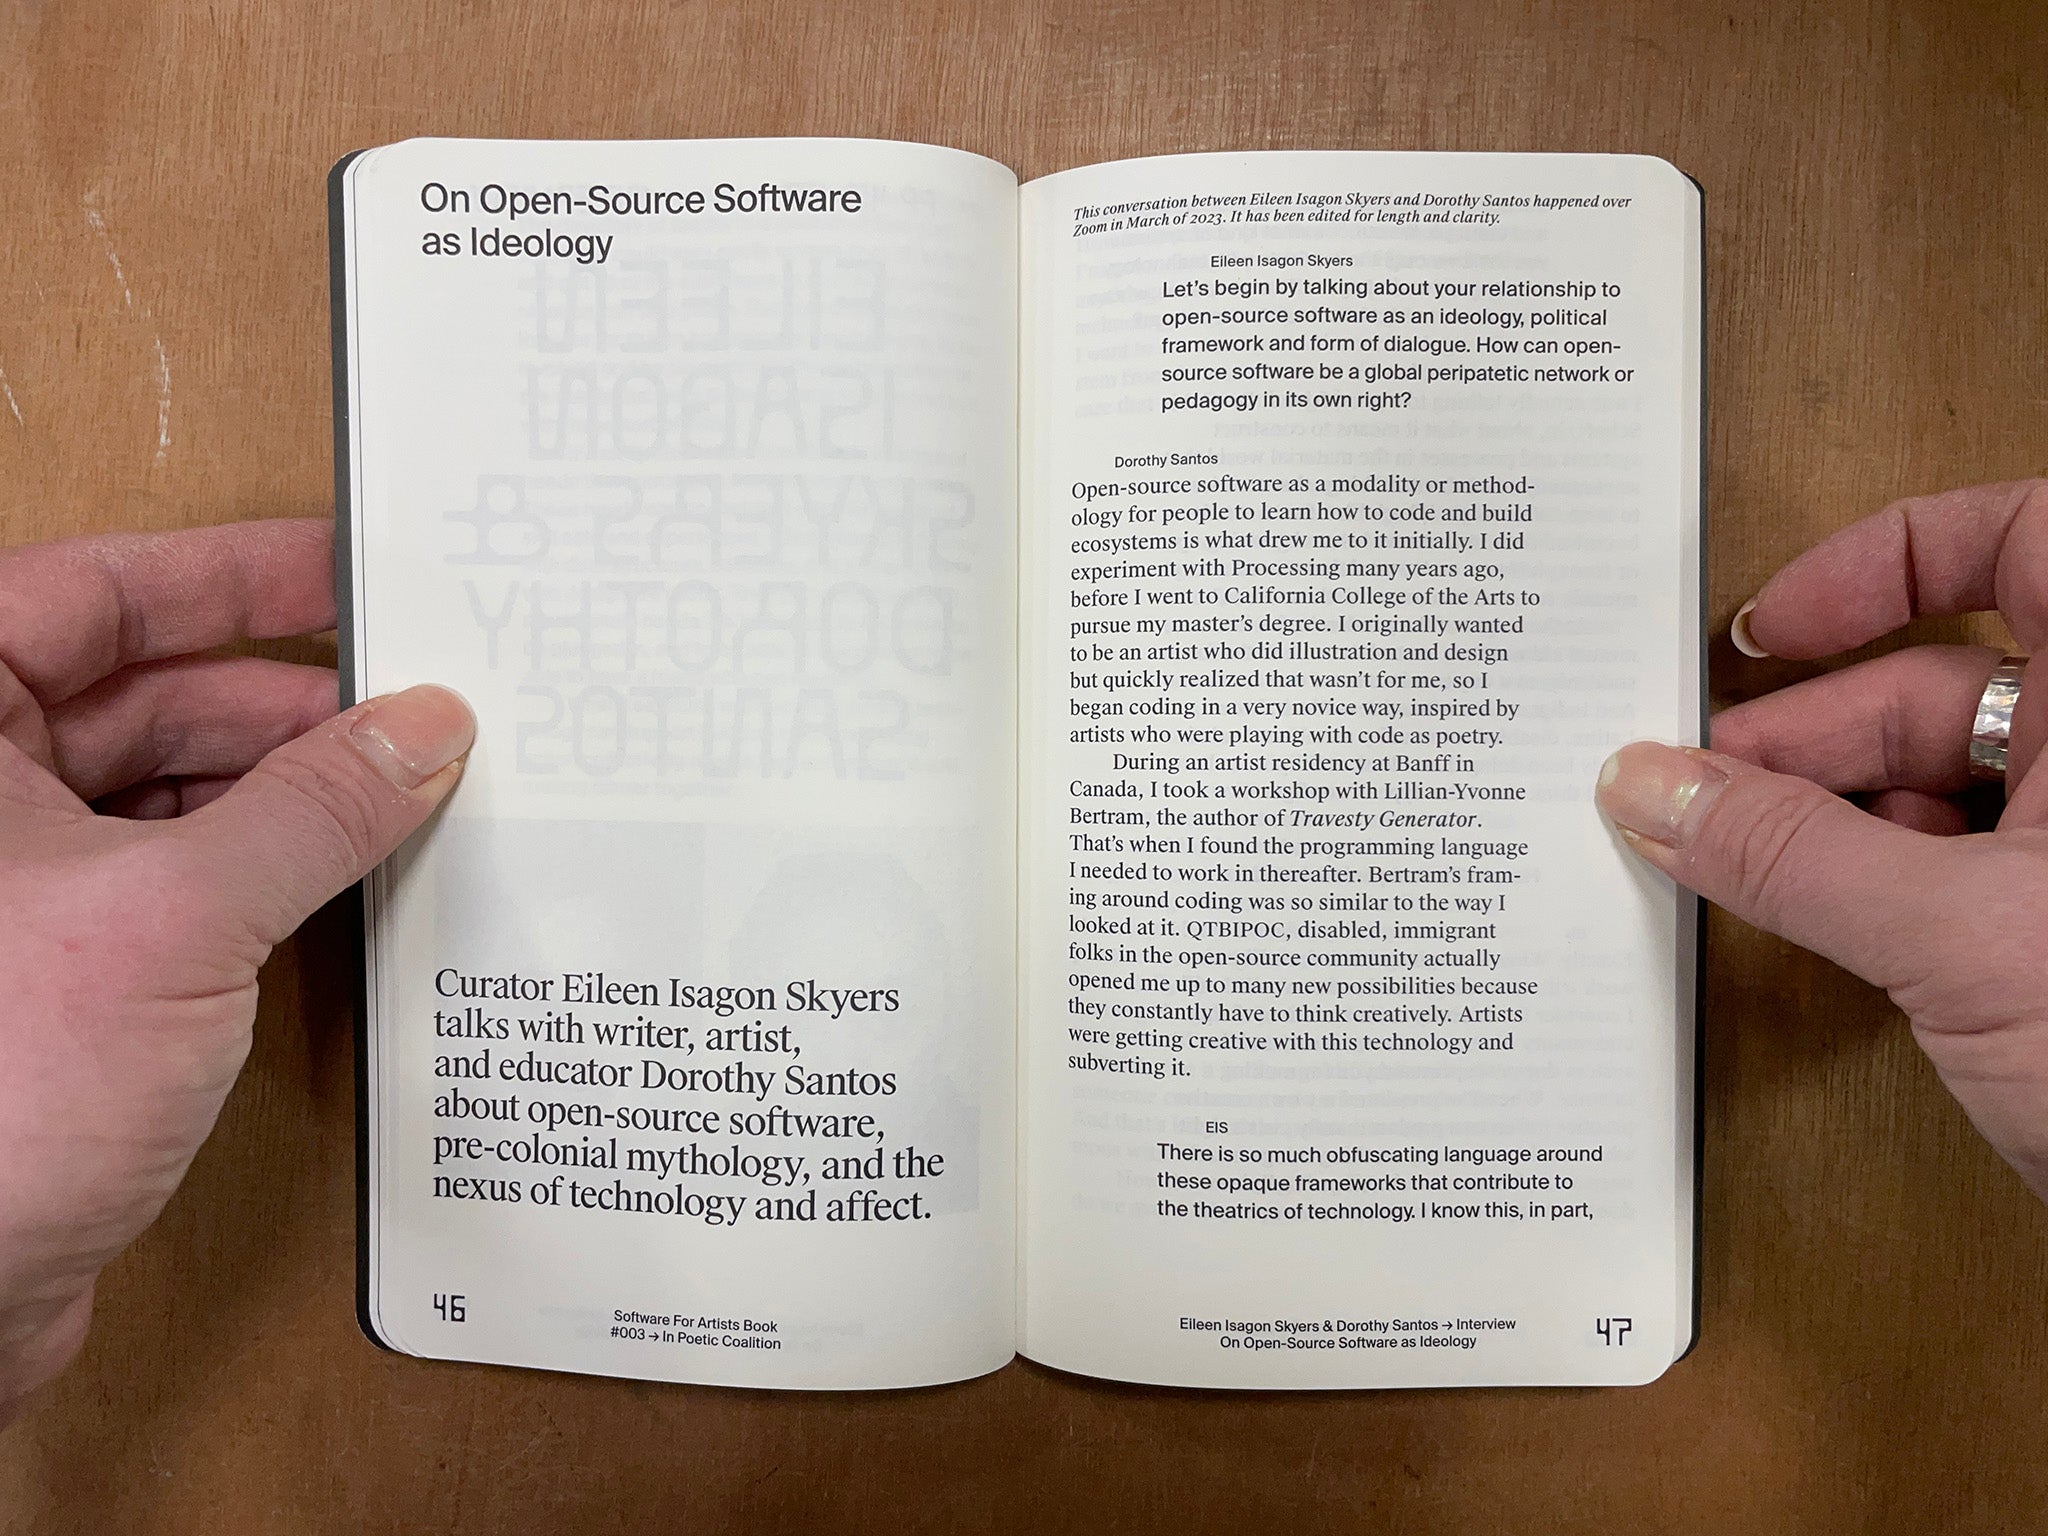 SOFTWARE FOR ARTISTS BOOK: IN POETIC COALITION Ed. by Zainab Aliyu